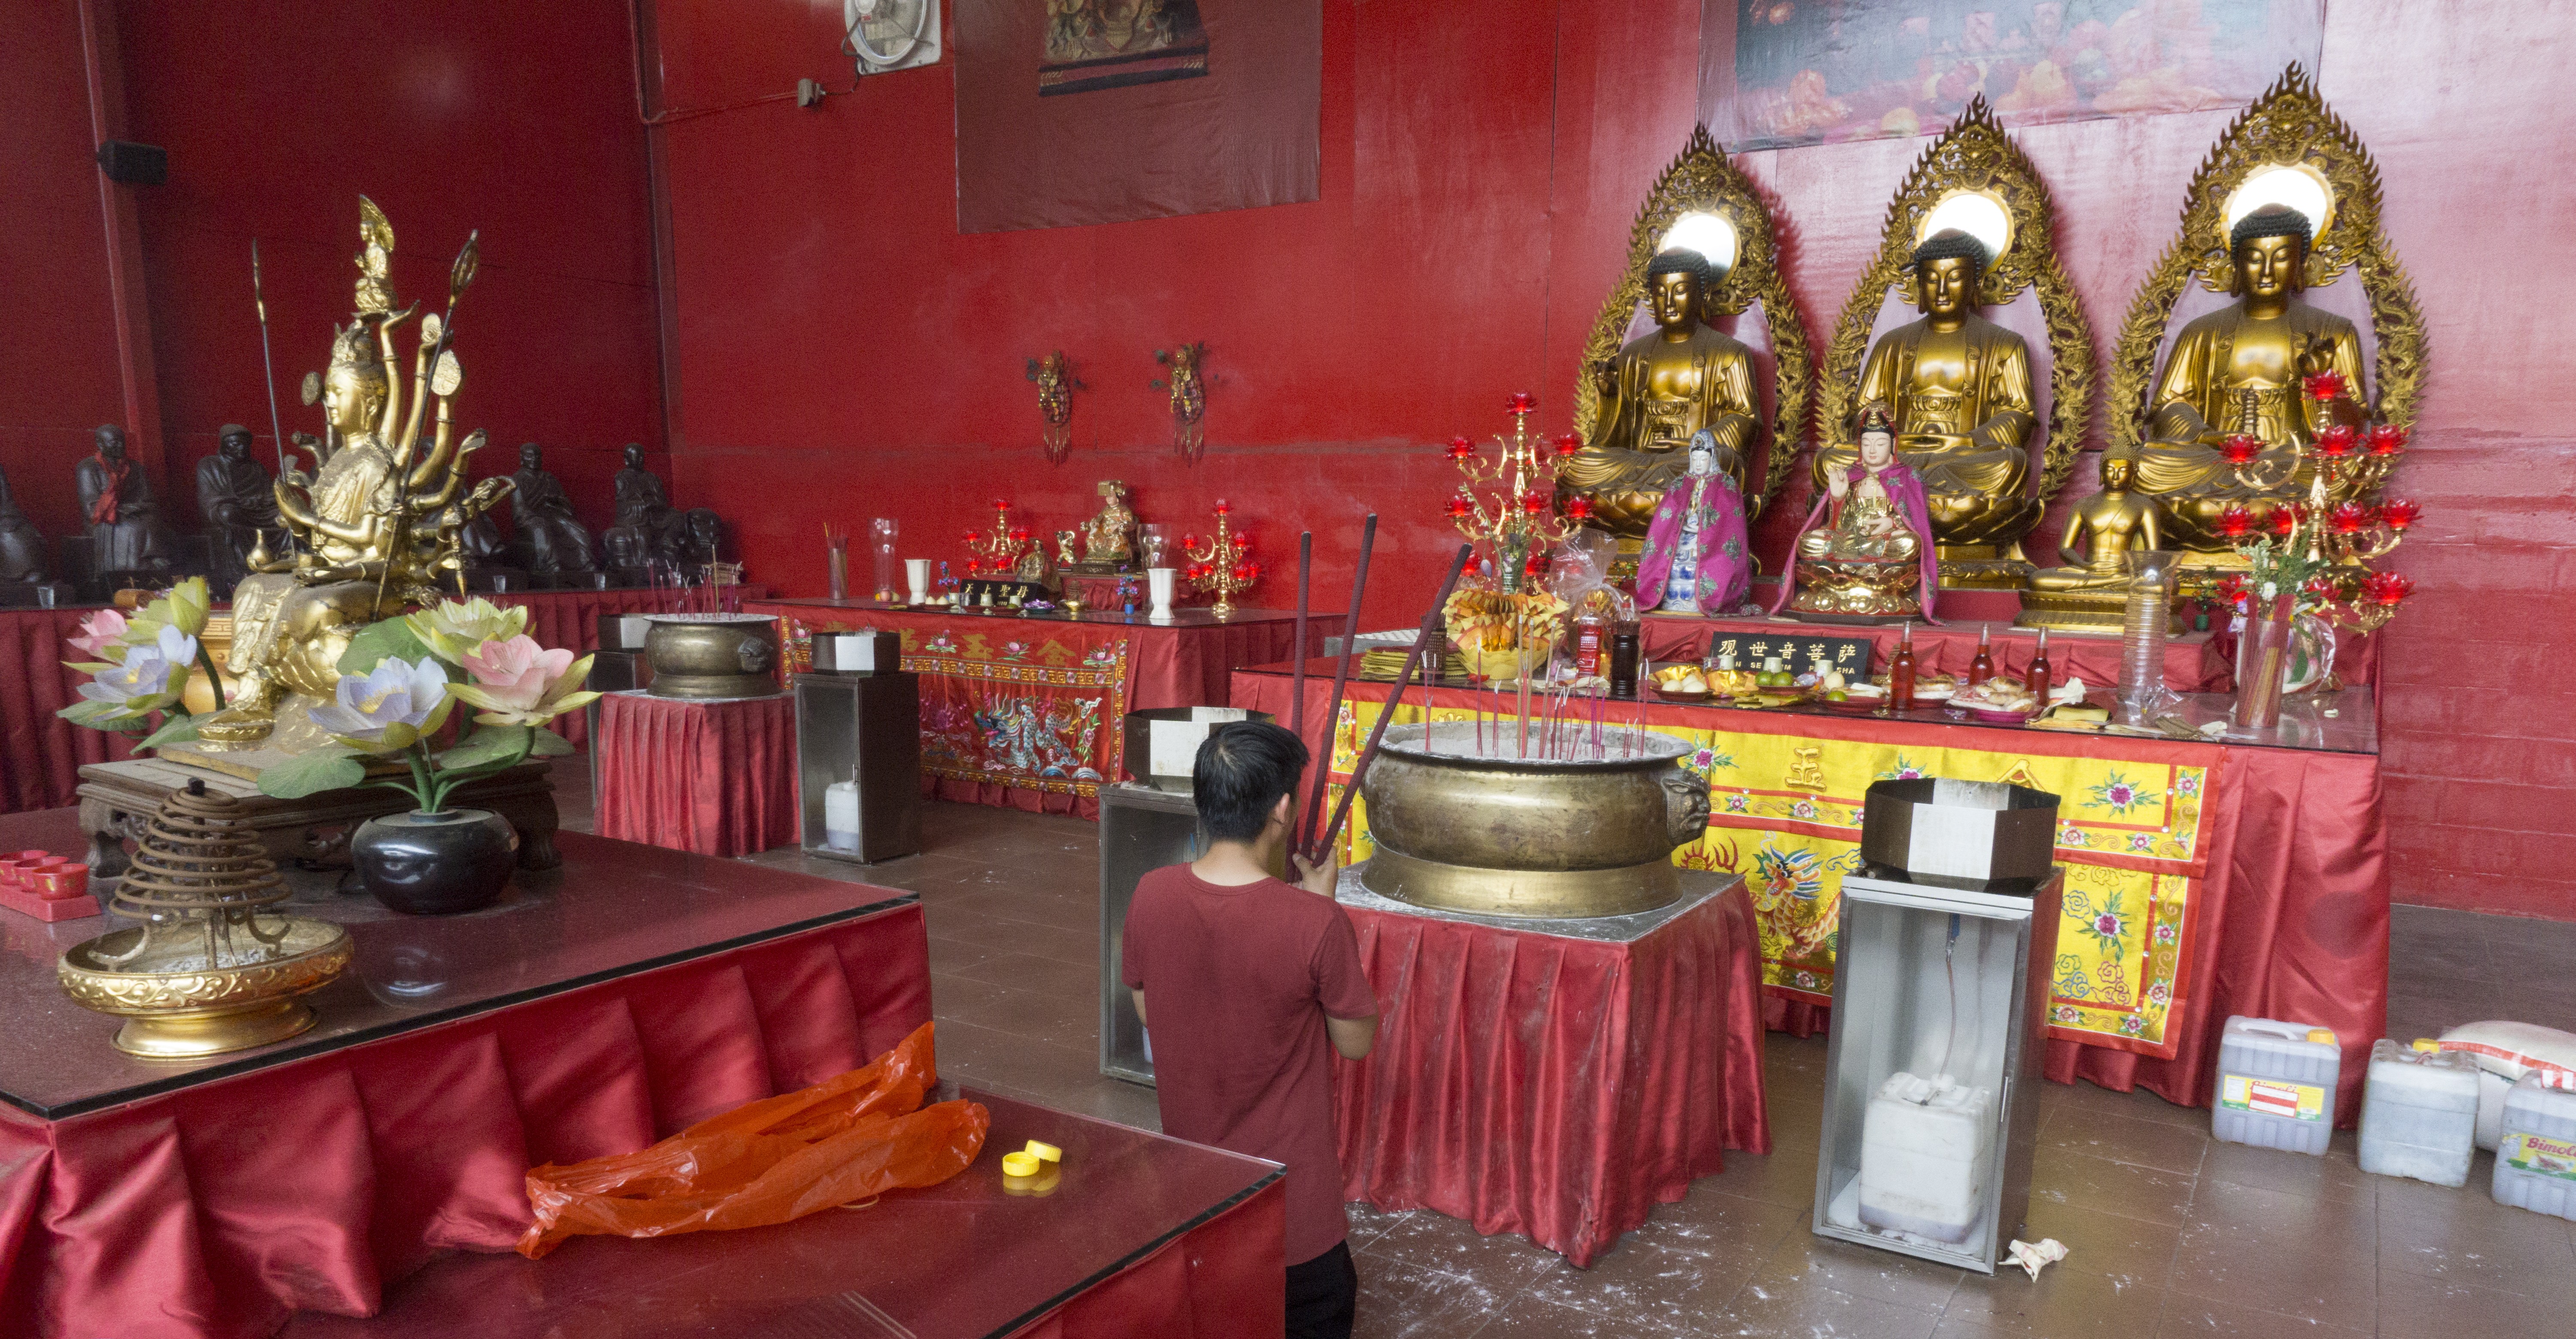 A worshipper kneels before an altar inside a temporary prayer hall, built after the 2015 fire, at the Dharma Bhakti temple in Jakarta, Indonesia. Photo: Nivell Radya